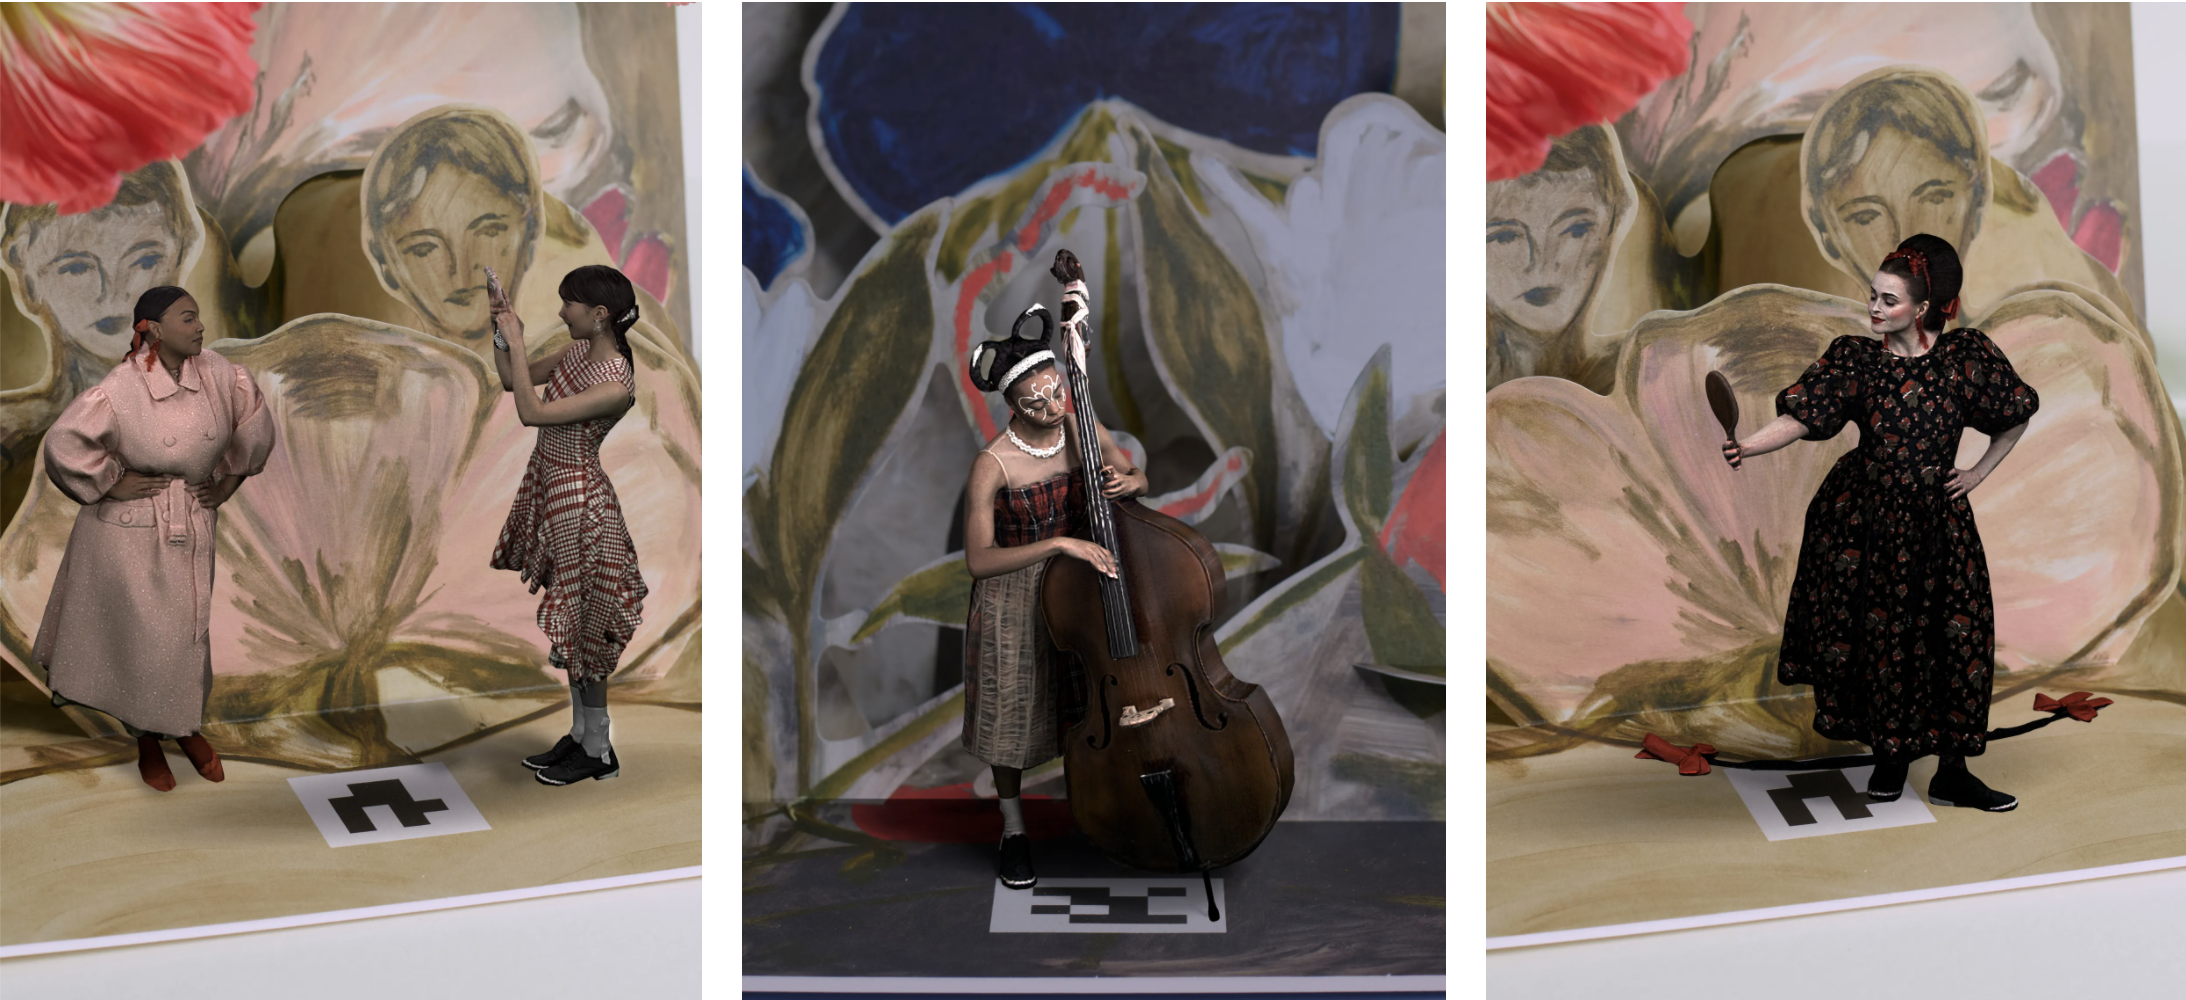 Simone Rocha x H&M Launches a theatrical WebAR pop-up book with British painter Faye Wei Wei